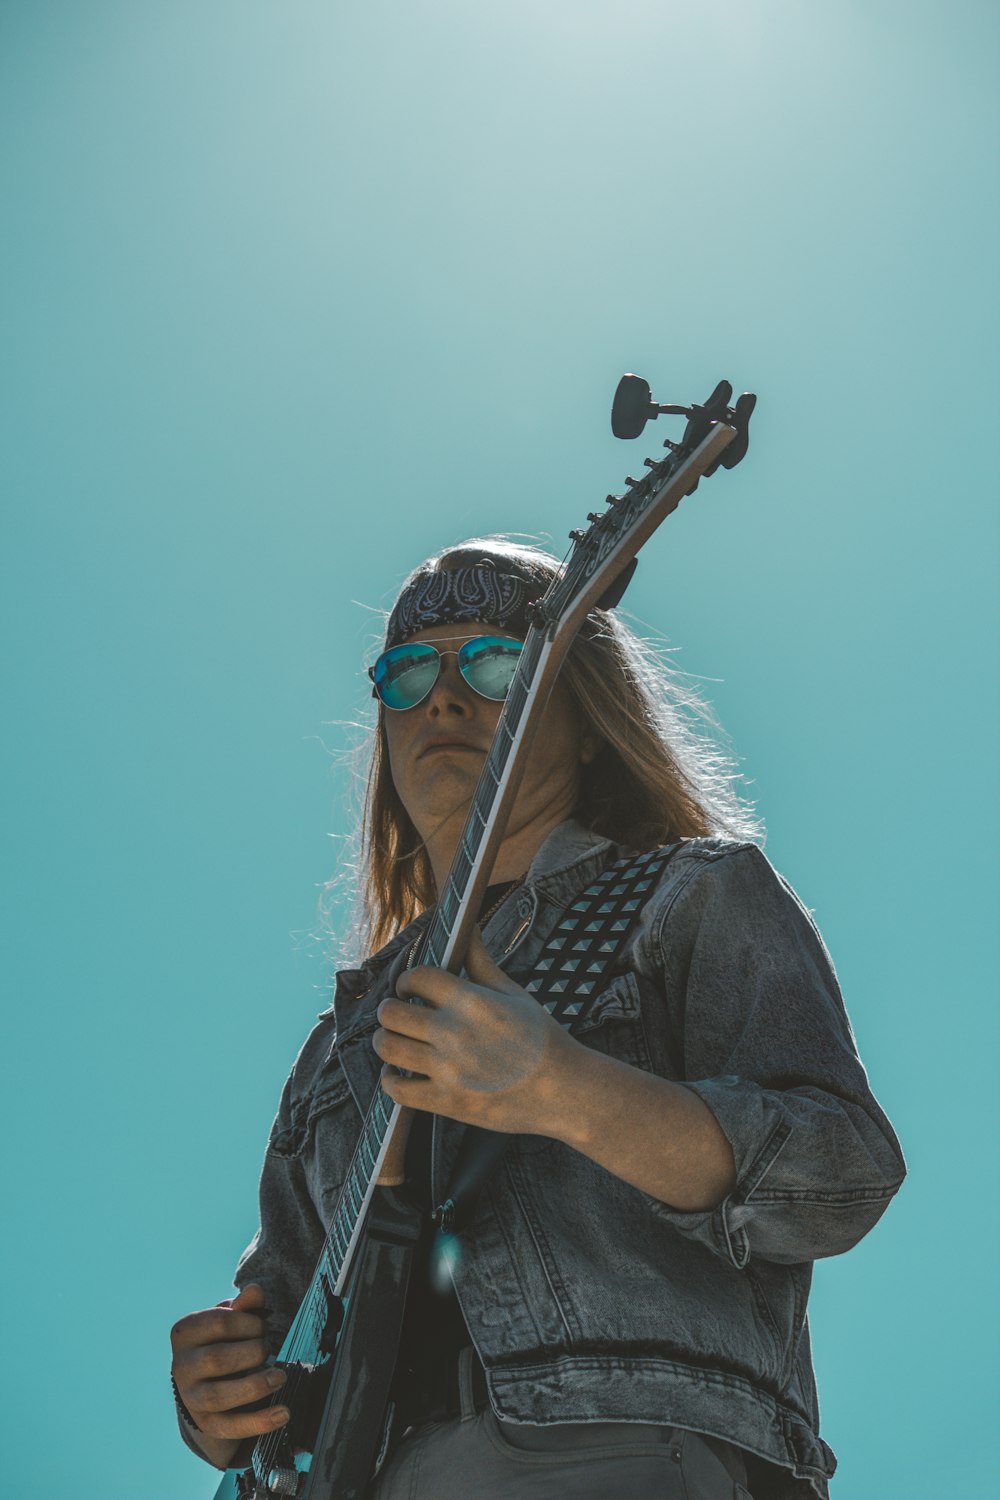 a woman holding a guitar and wearing sunglasses